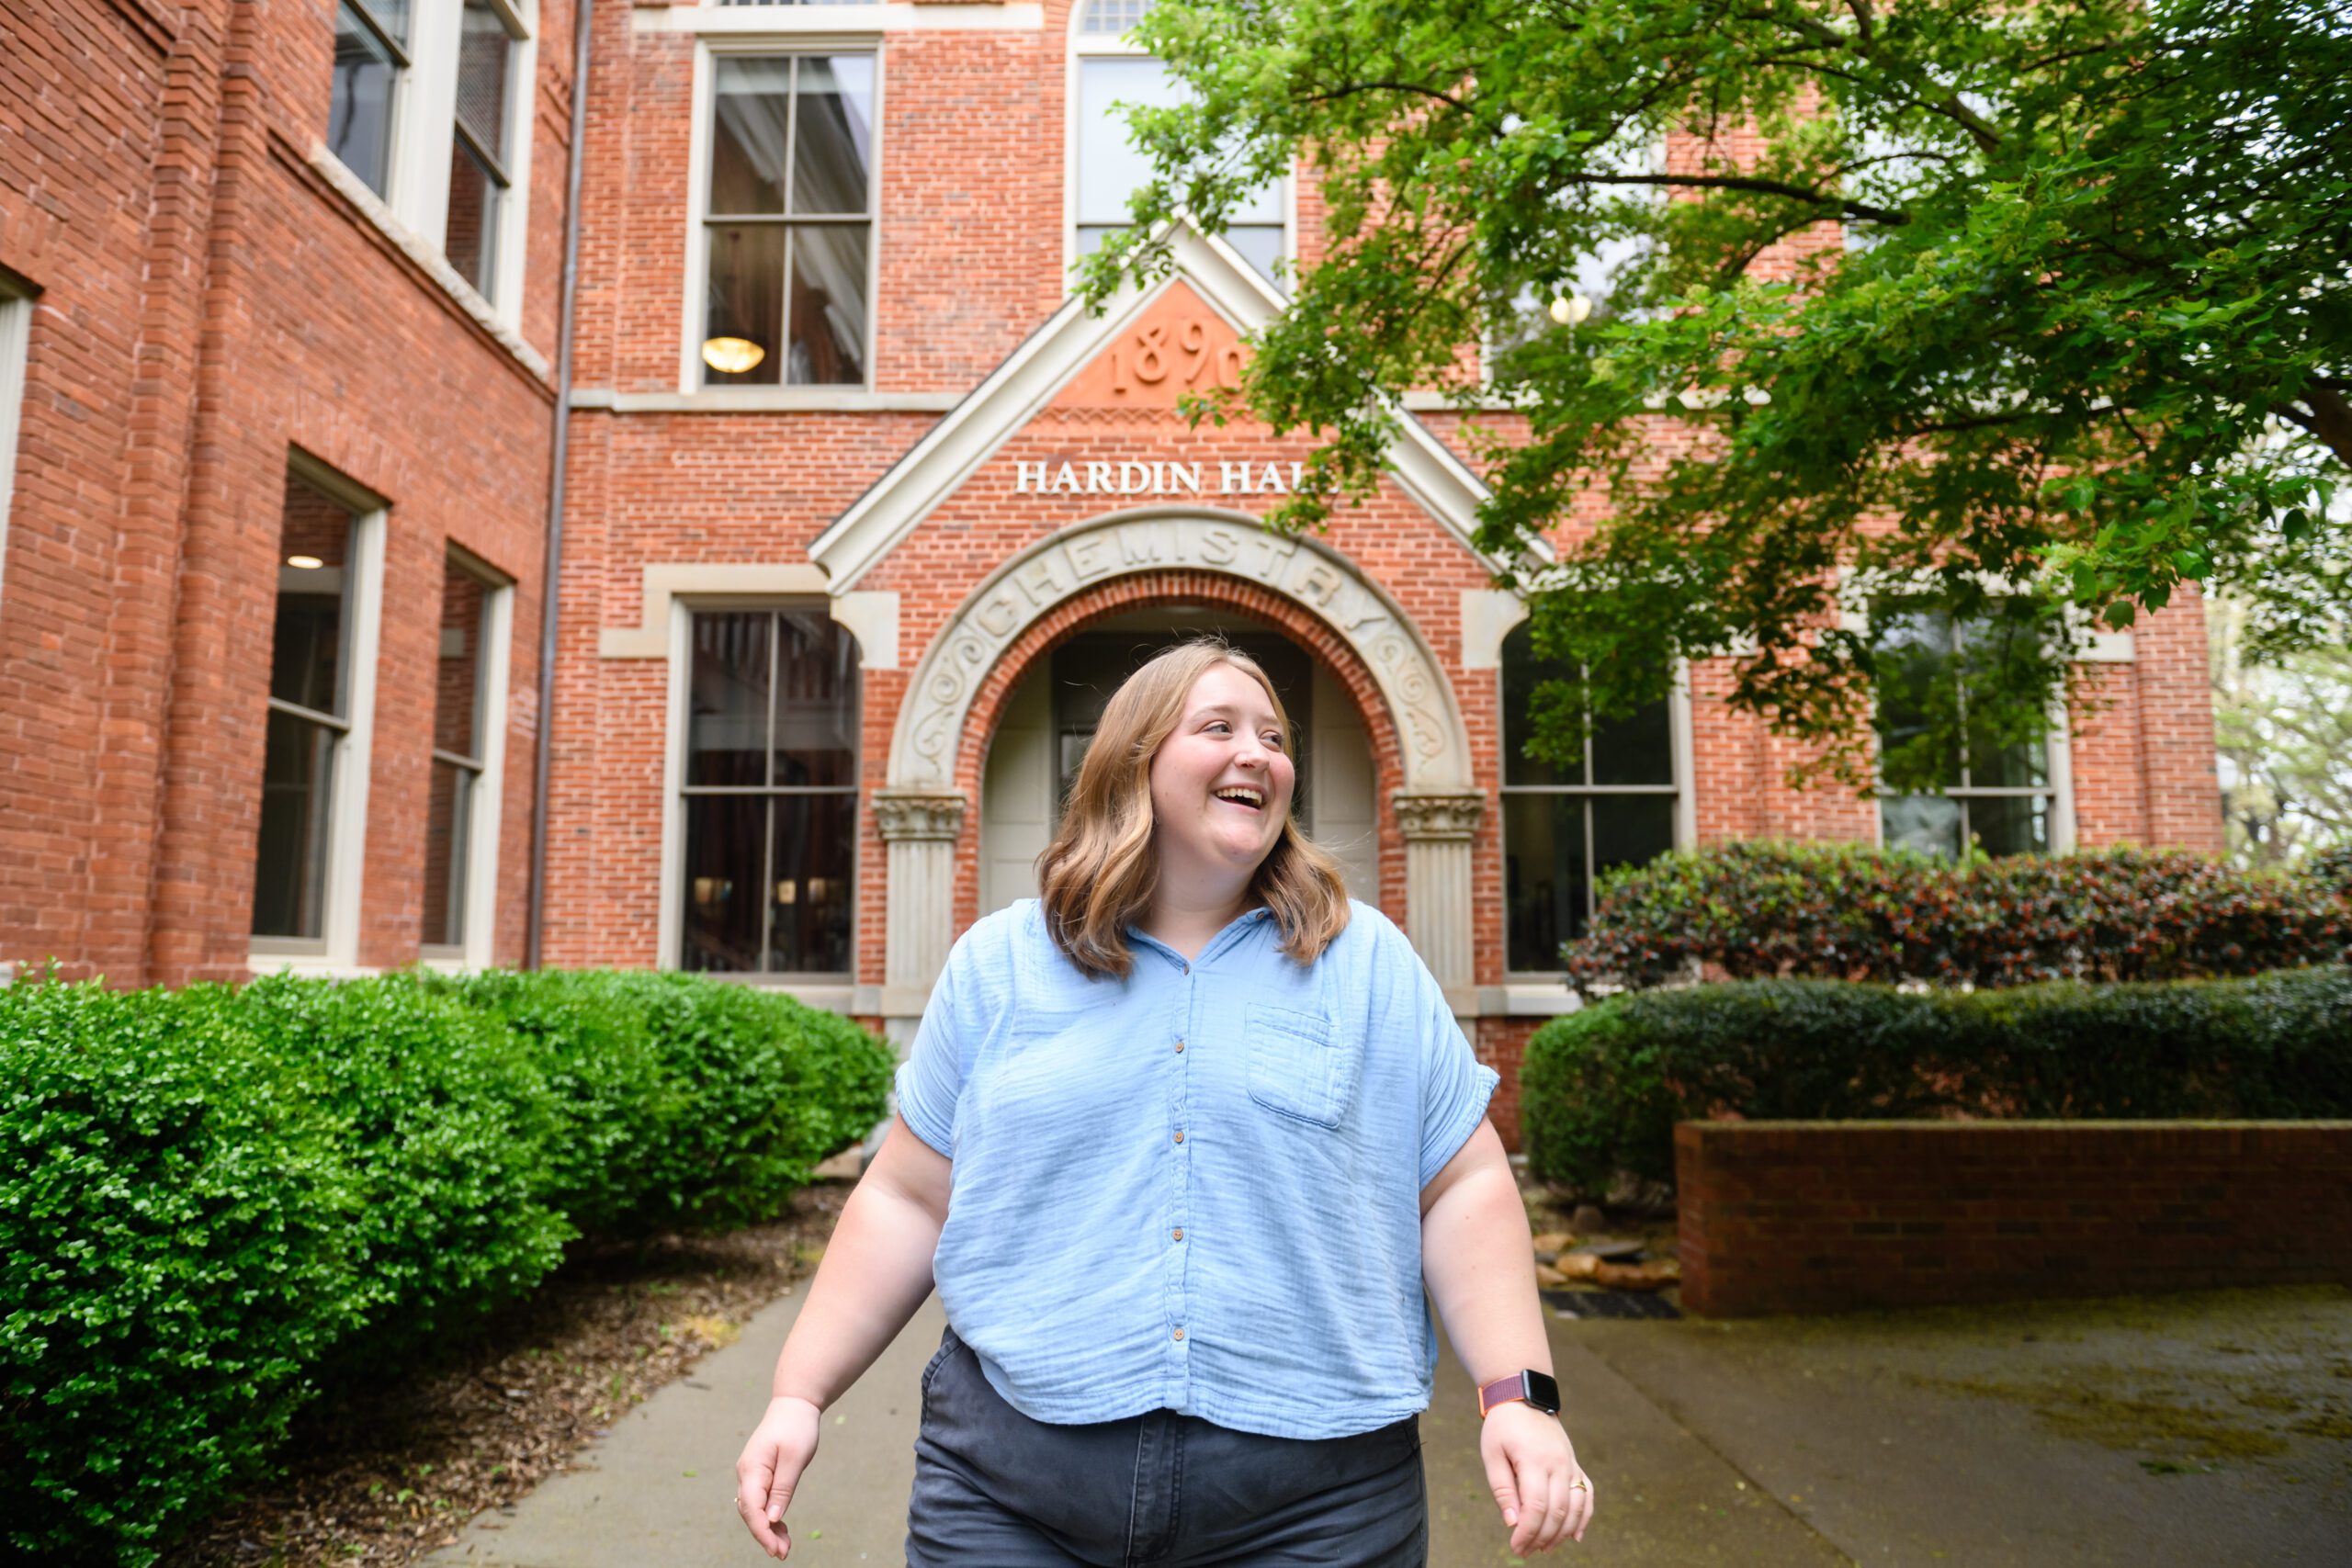 A college student smiles while she walks away from Hardin hall.